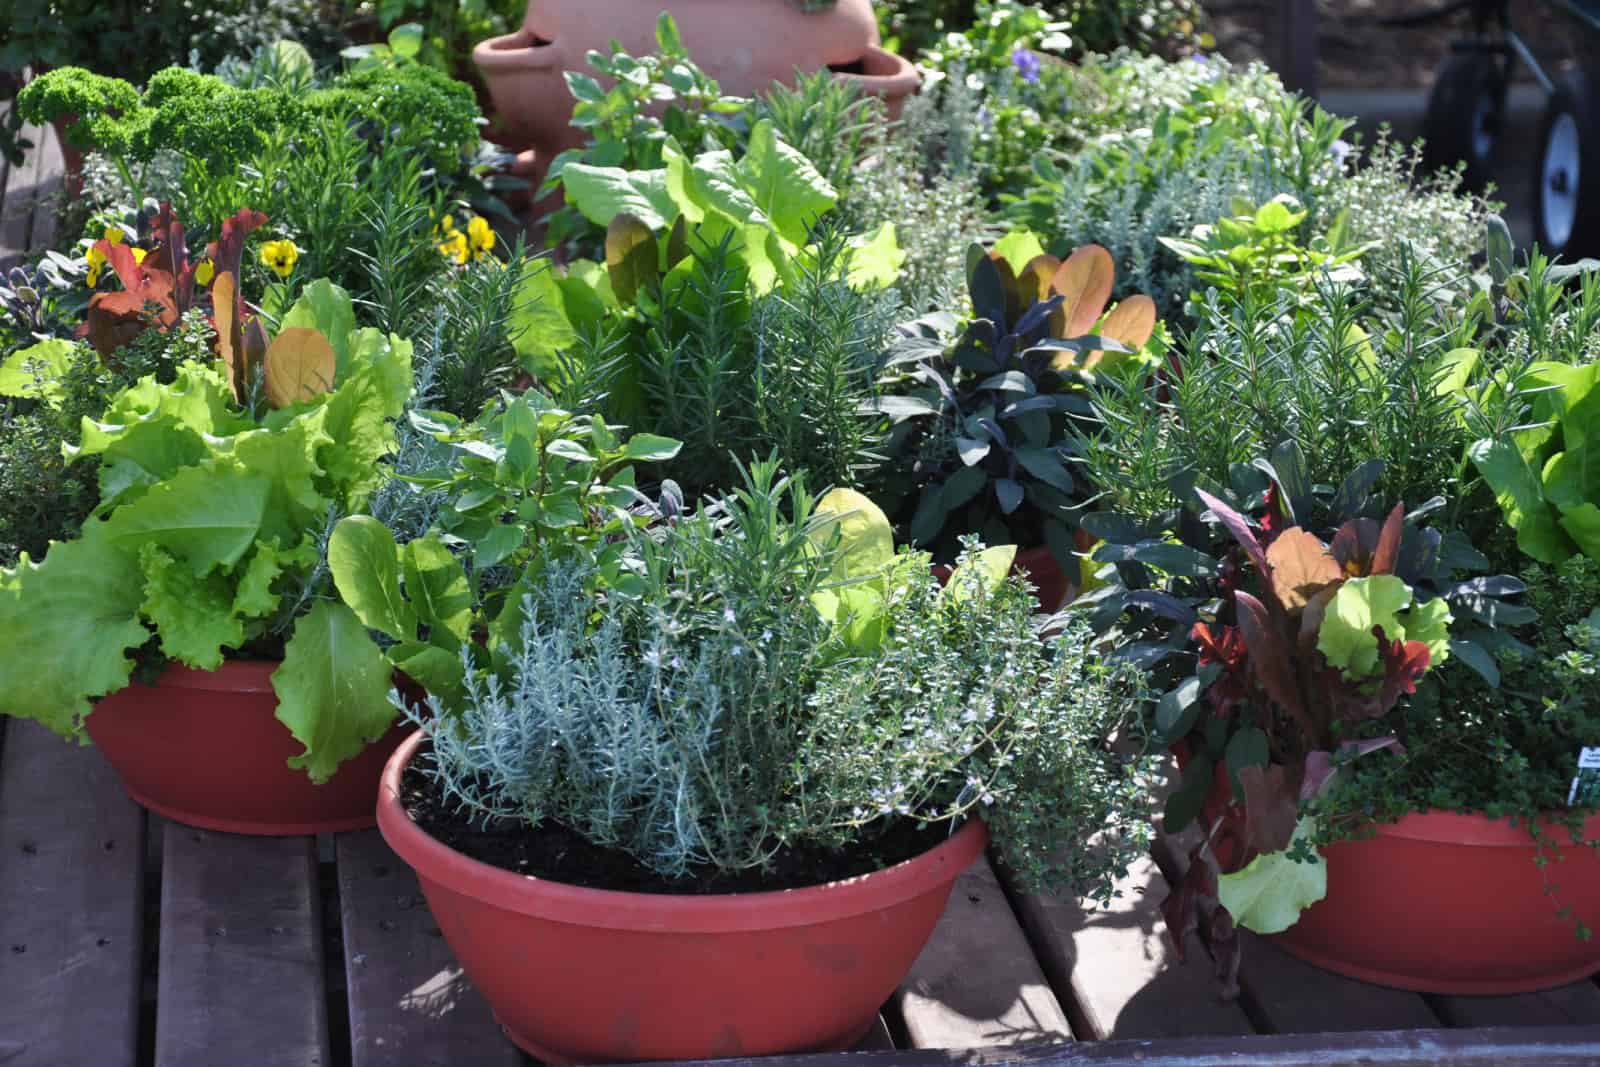 Fresh herbs grown in compact containers suitable for backyard or patio gardening